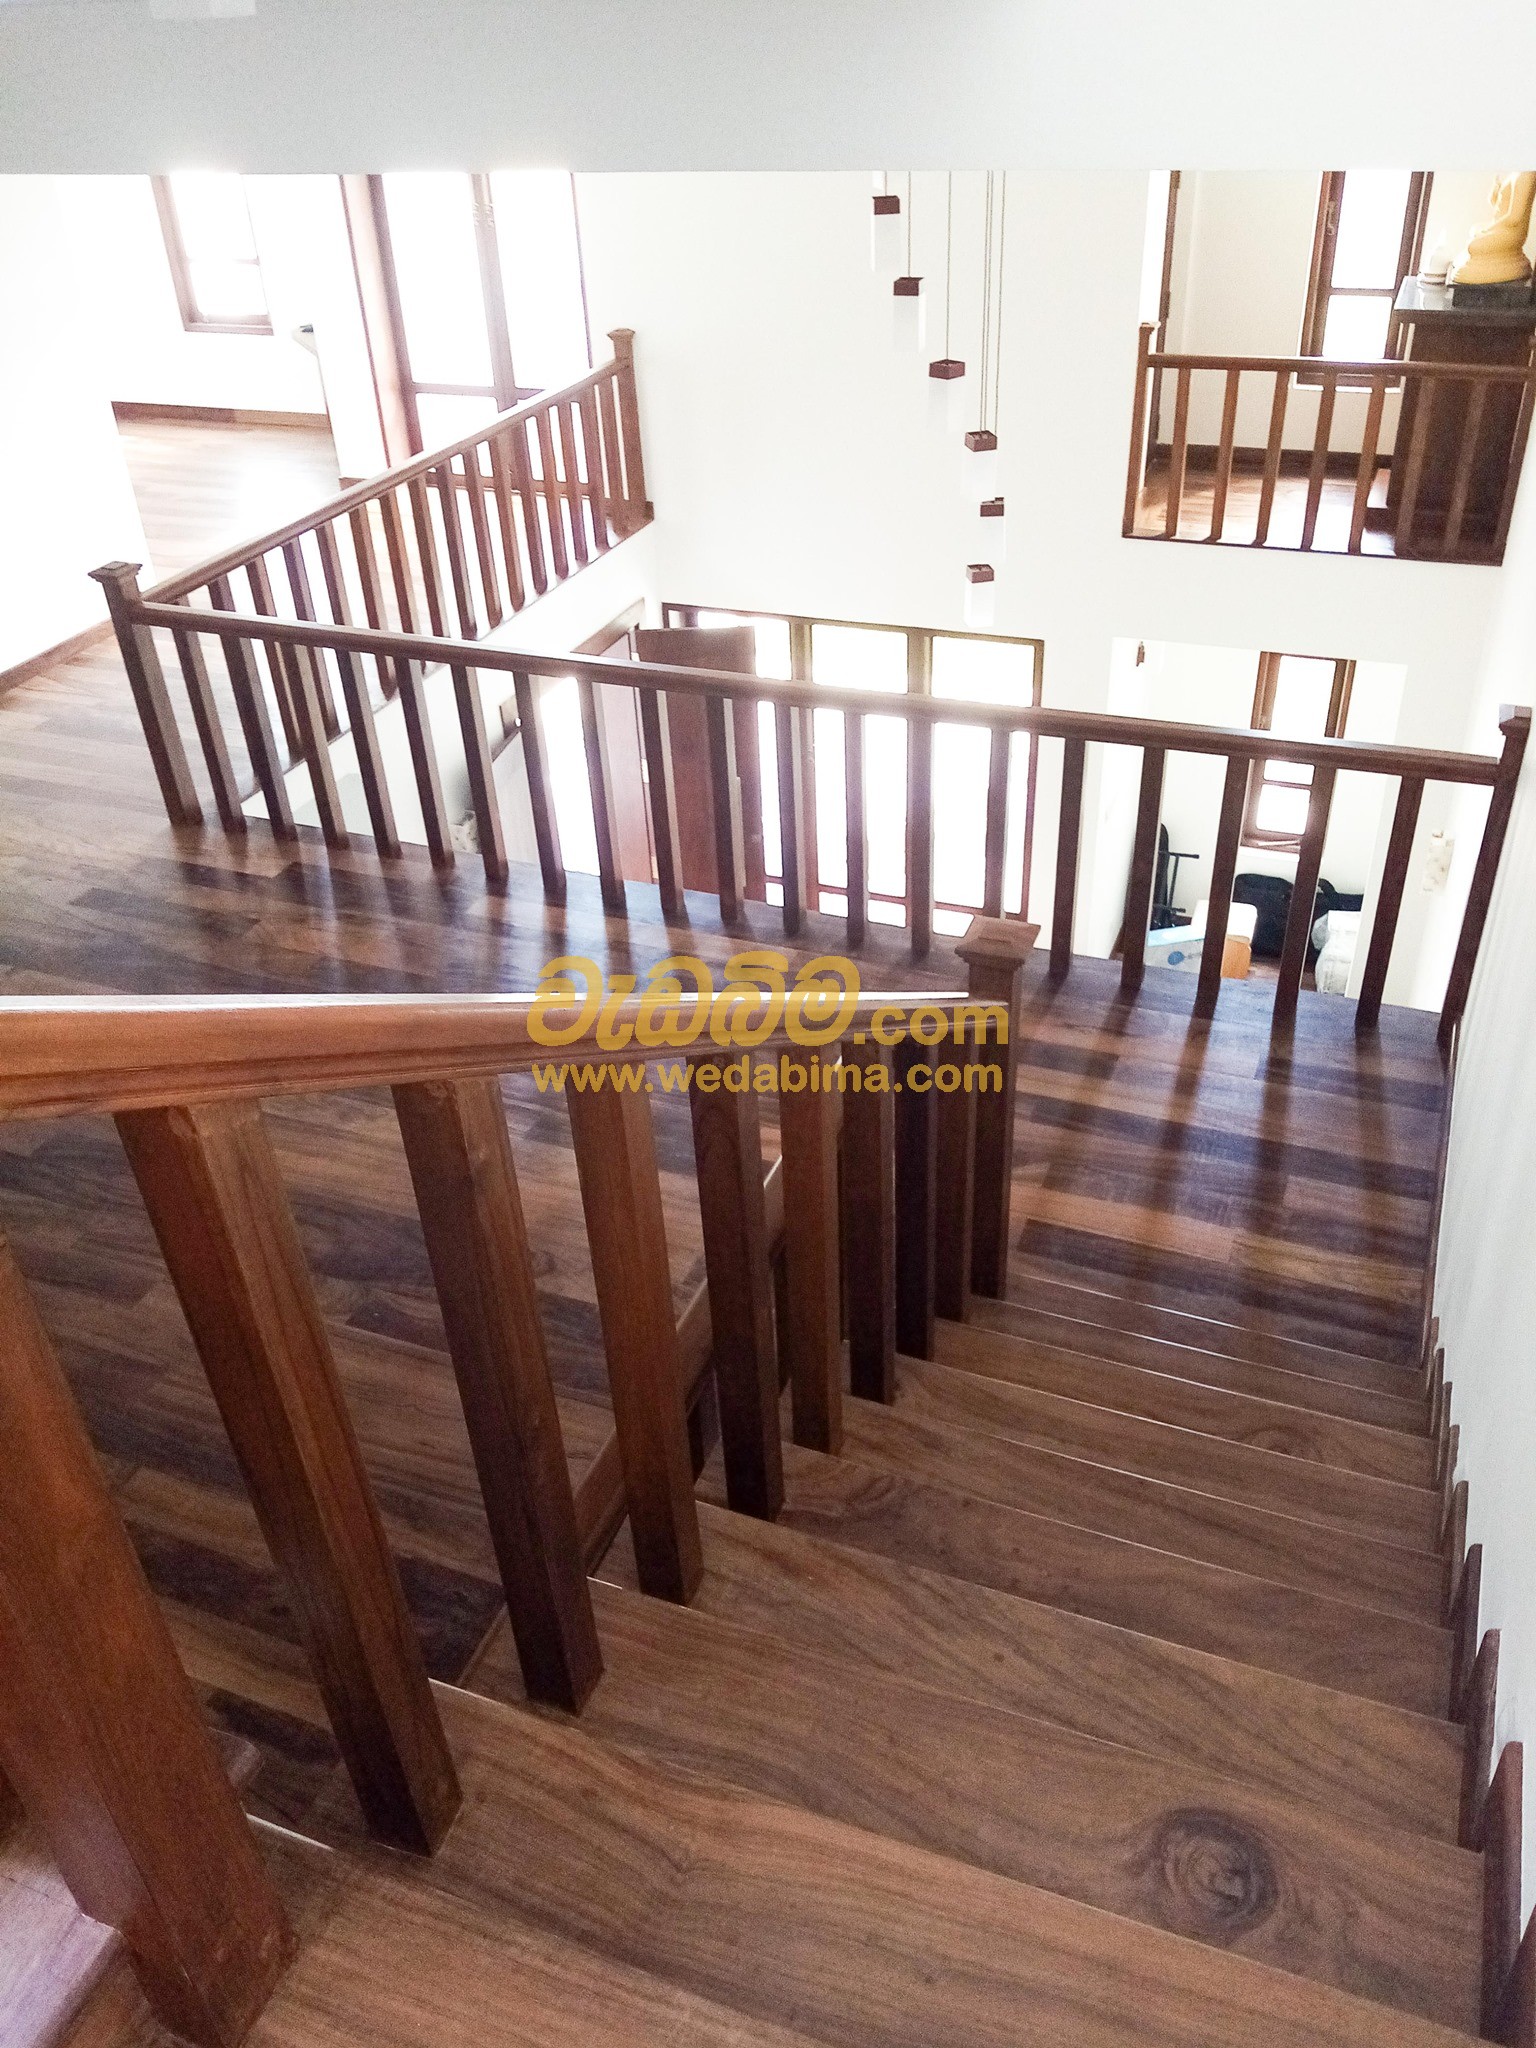 Wooden staircase railing design - Colombo